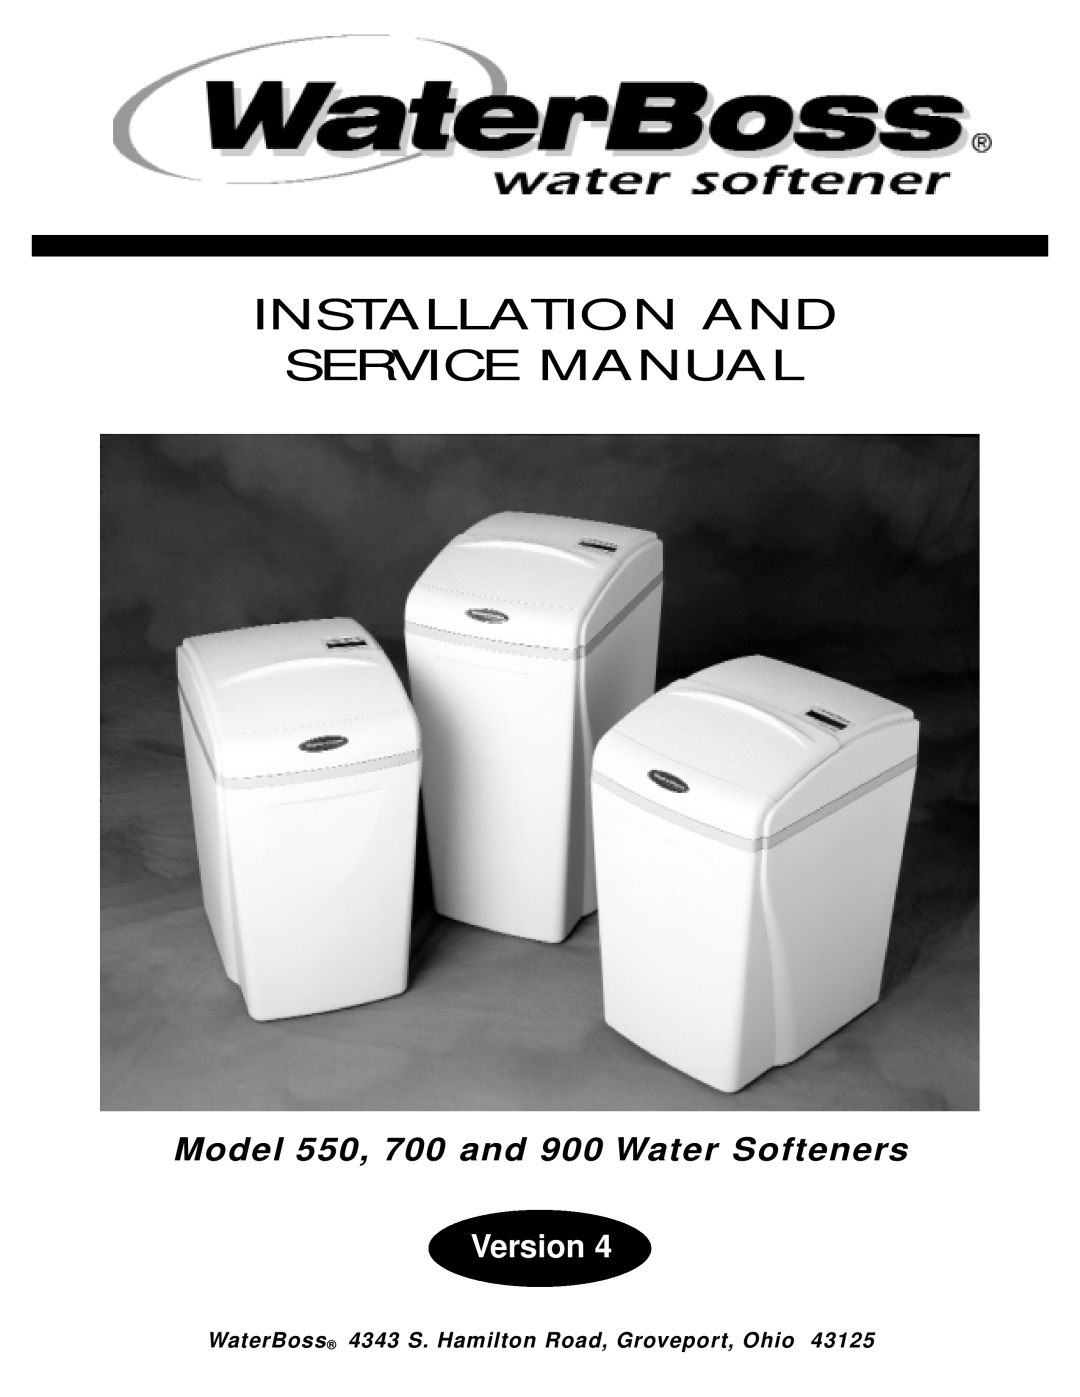 Water Boss service manual WaterBoss 4343 S. Hamilton Road, Groveport, Ohio, Model 550, 700 and 900 Water Softeners 